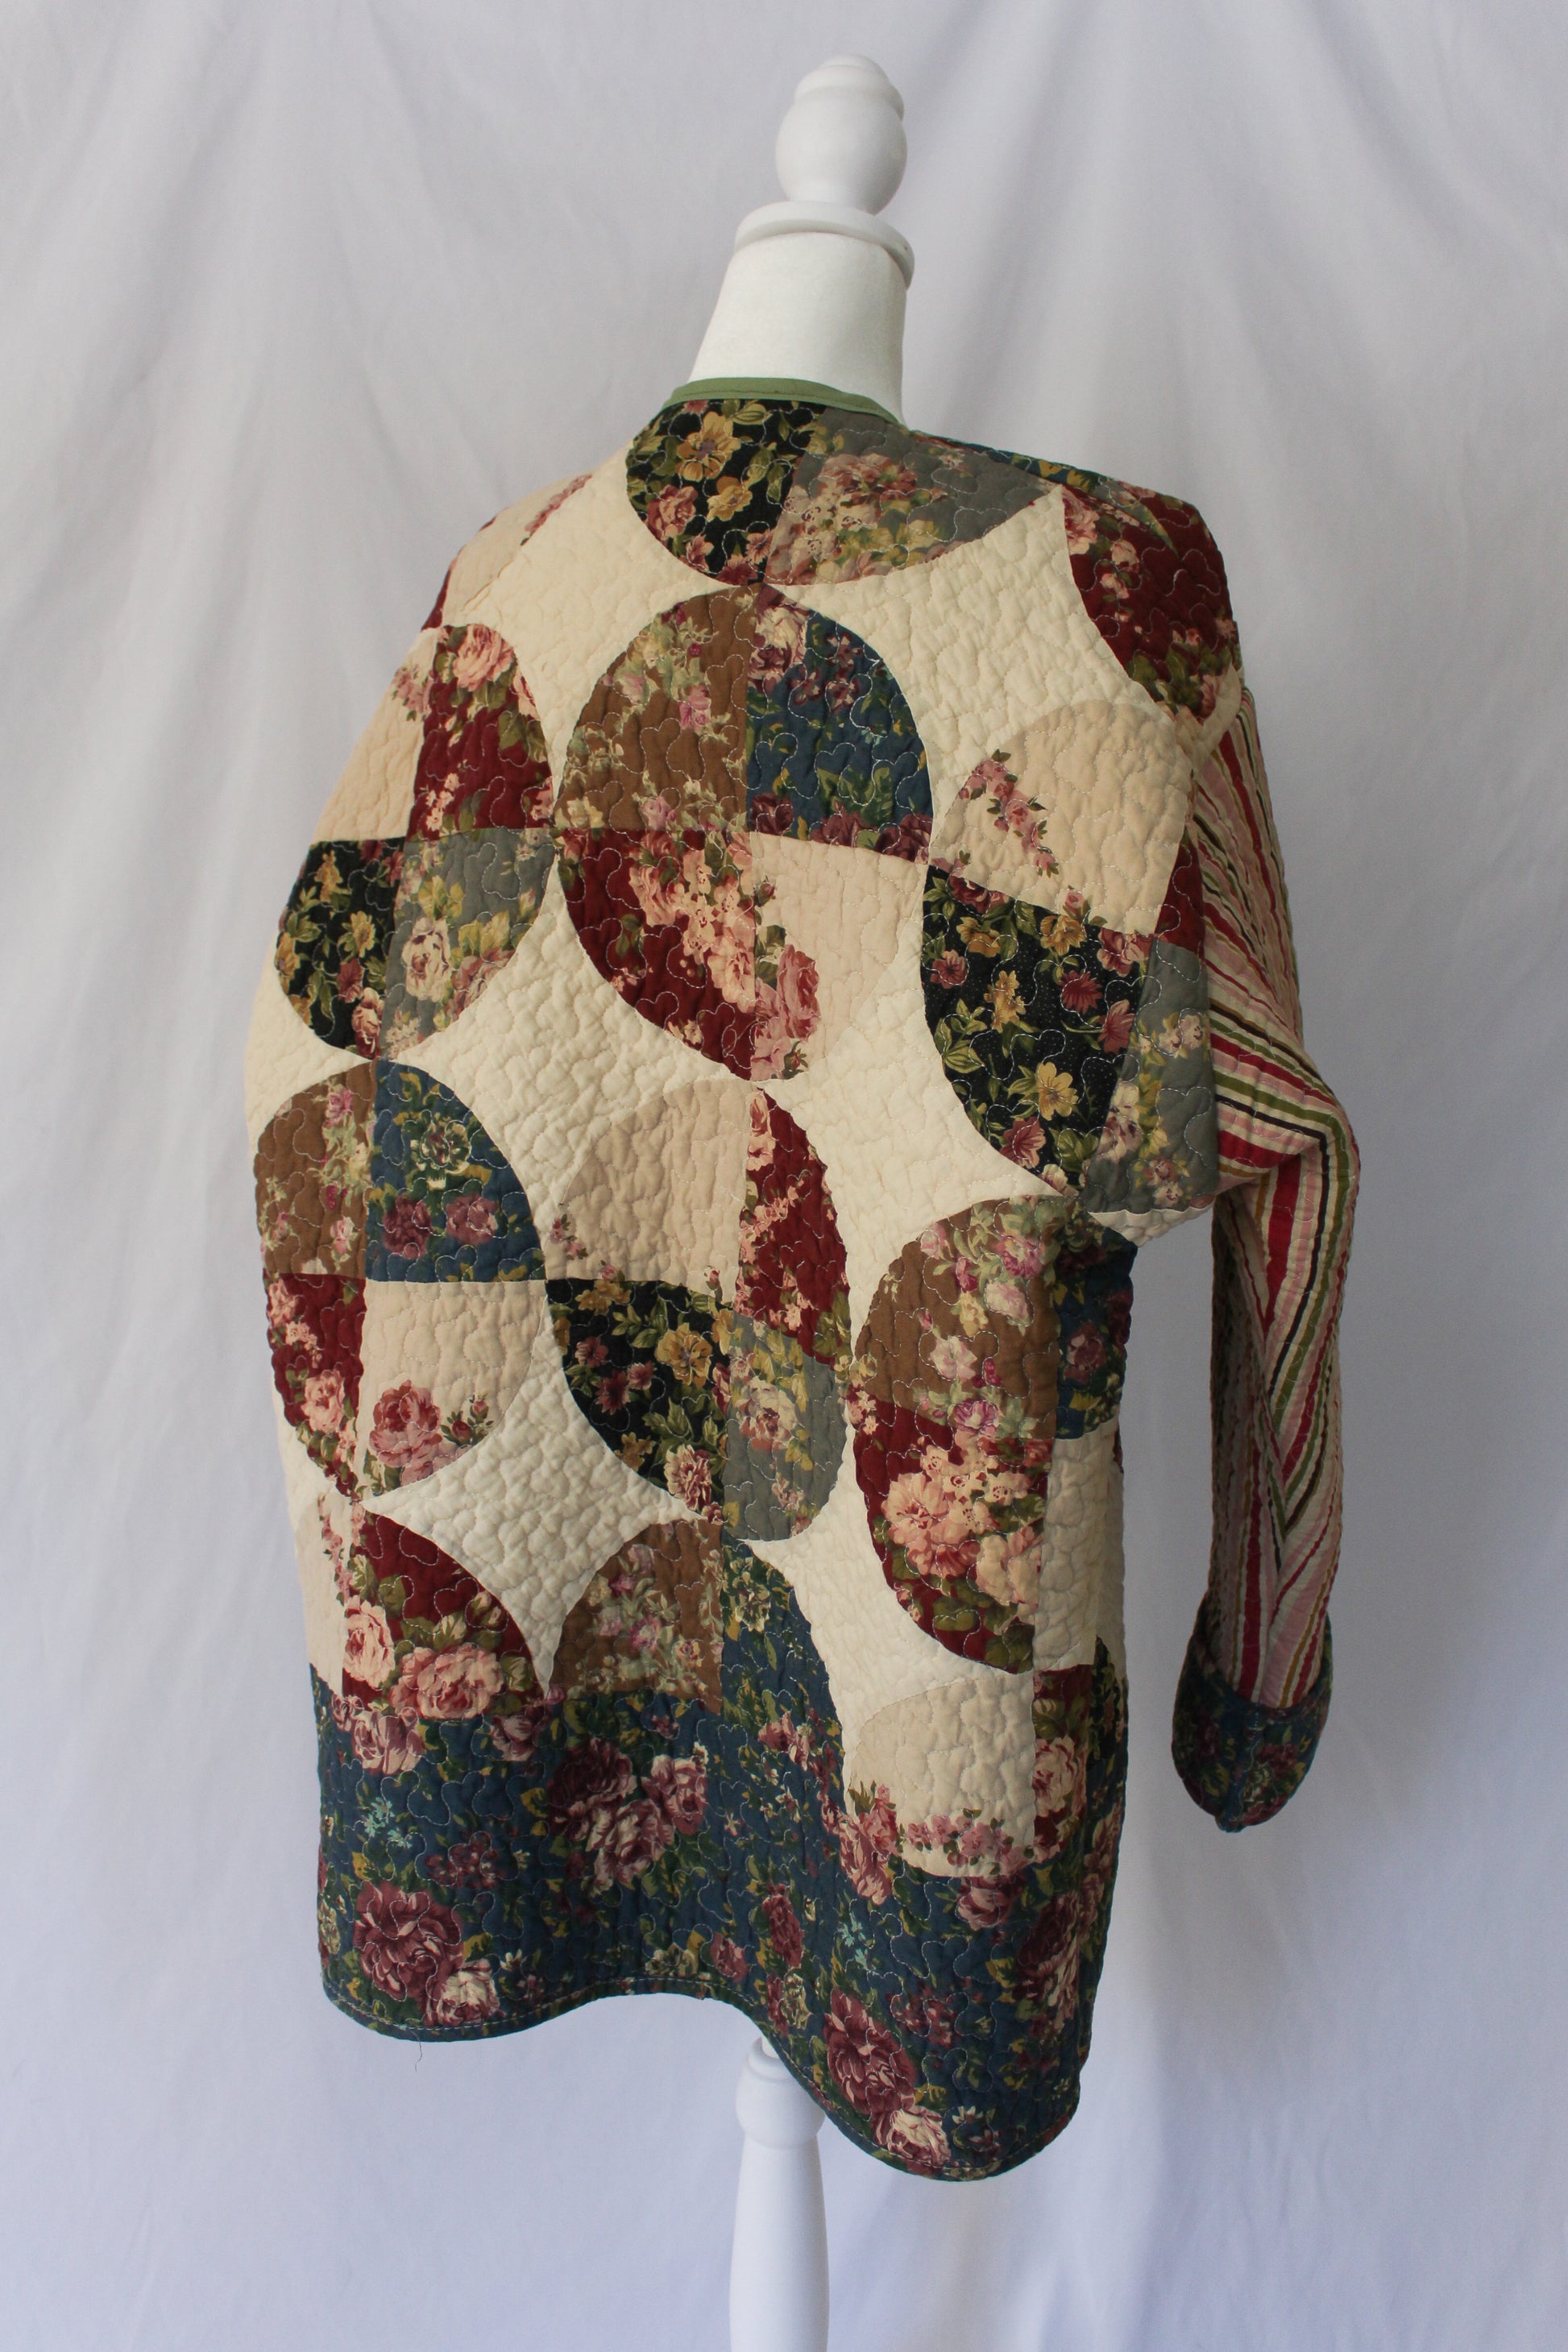 floral circular quilt pattern jacket with striped, striped quilt jacket, handmade quilt coat